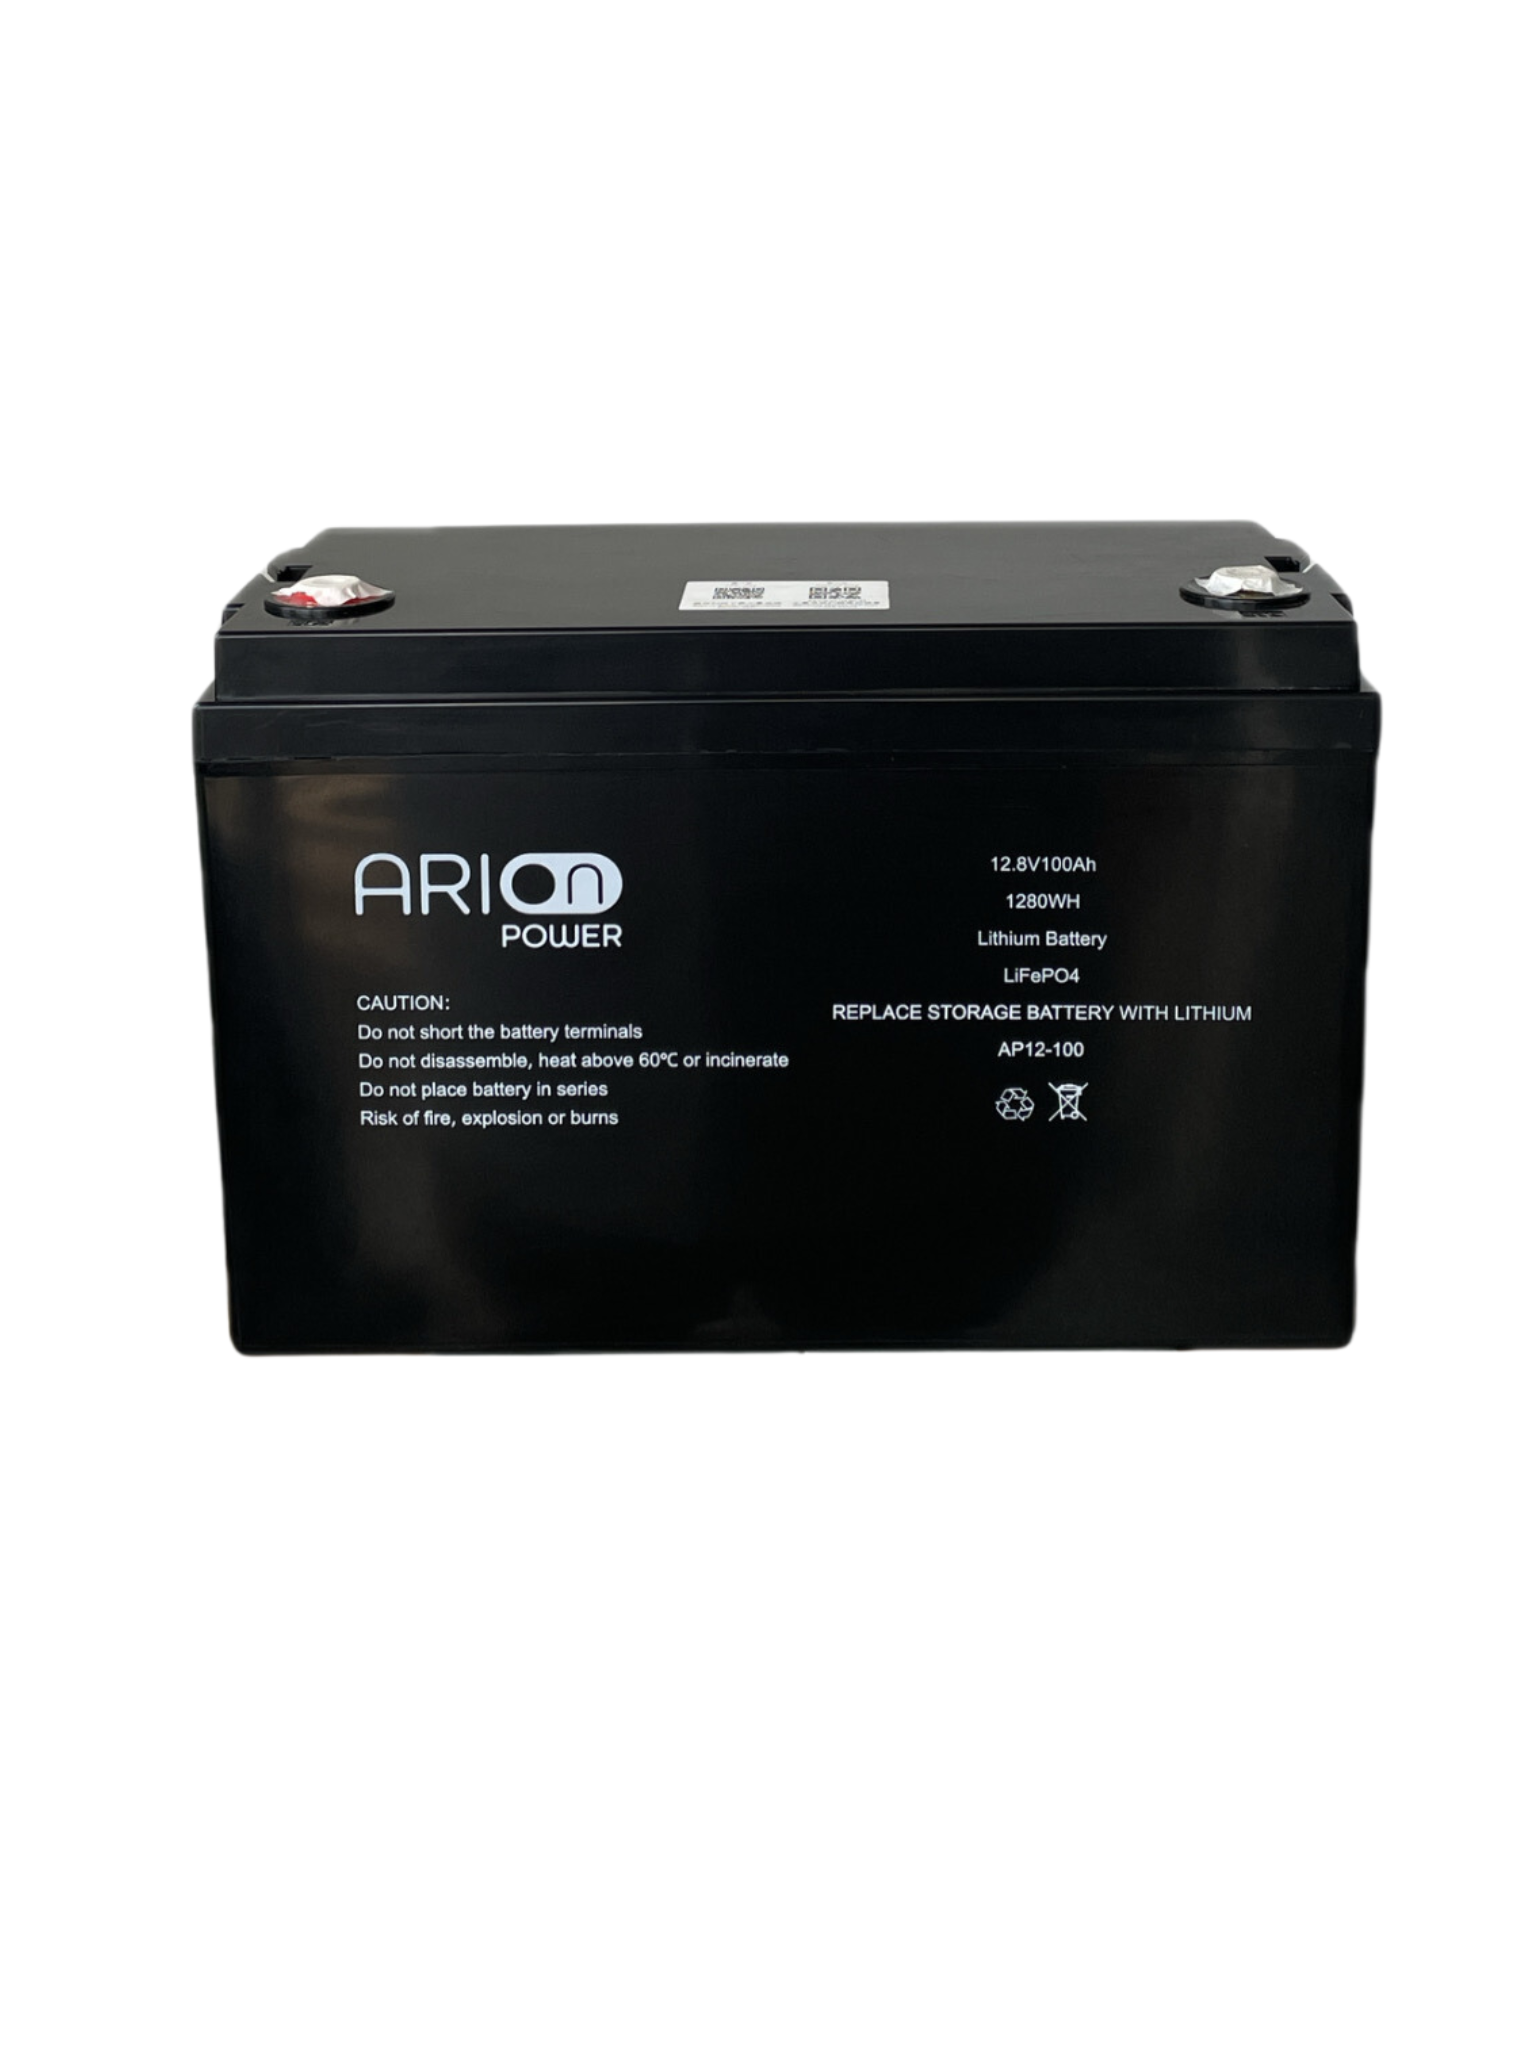 Arion Power 12.8V 100AH Lithium Iron Phosphate Battery BT (LiFePO4)